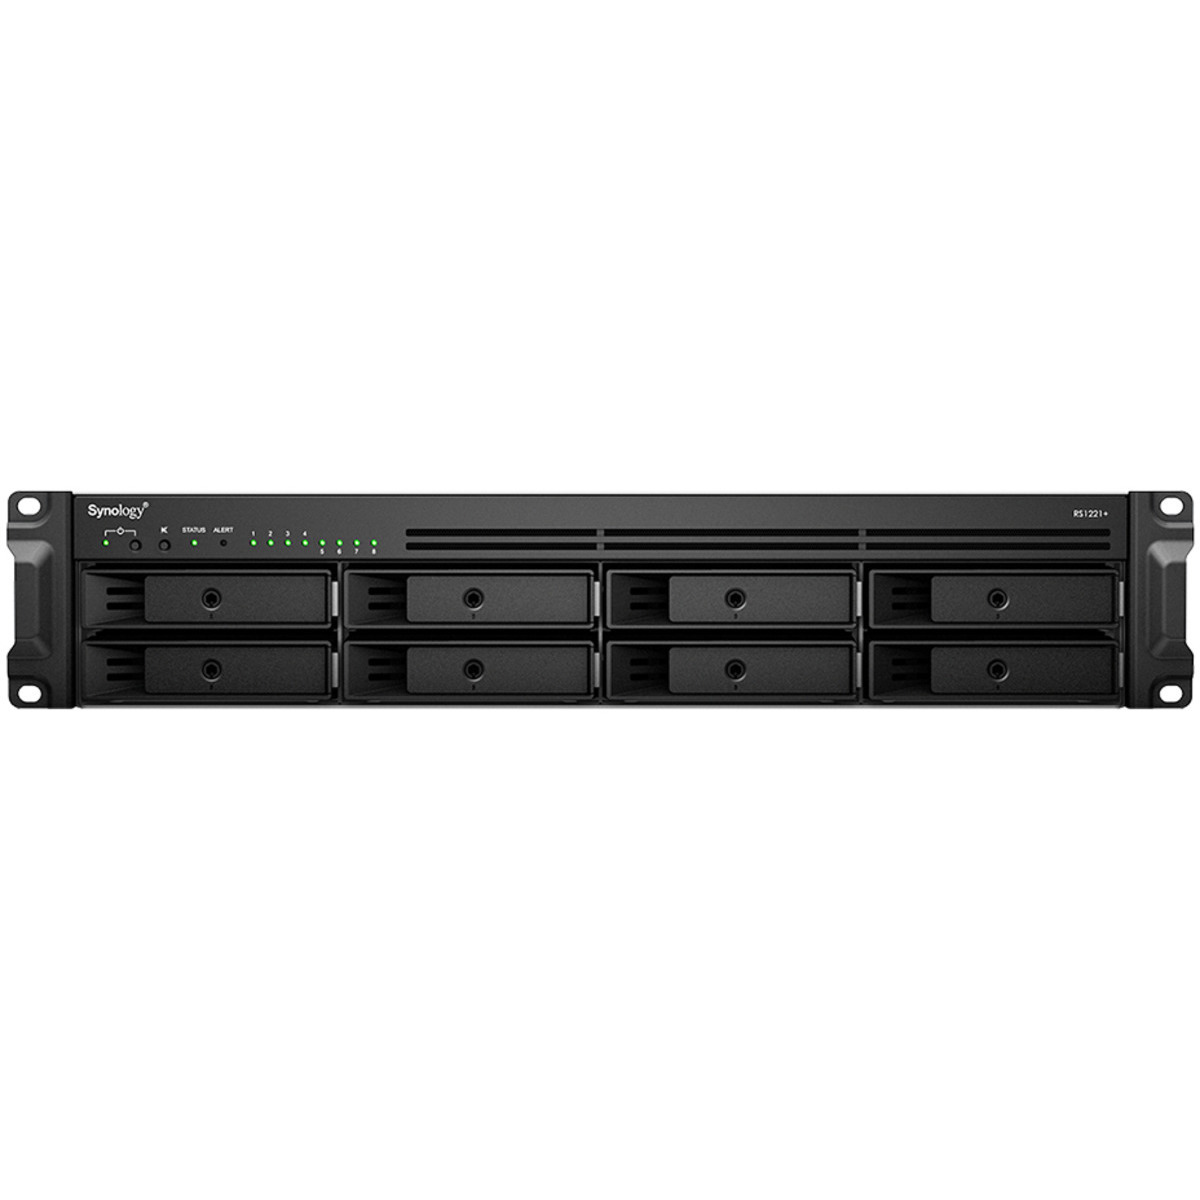 Synology RackStation RS1221+ 56tb 8-Bay RackMount Multimedia / Power User / Business NAS - Network Attached Storage Device 7x8tb TeamGroup EX2 Elite T253E2008T0C101 2.5 550/520MB/s SATA 6Gb/s SSD CONSUMER Class Drives Installed - Burn-In Tested RackStation RS1221+